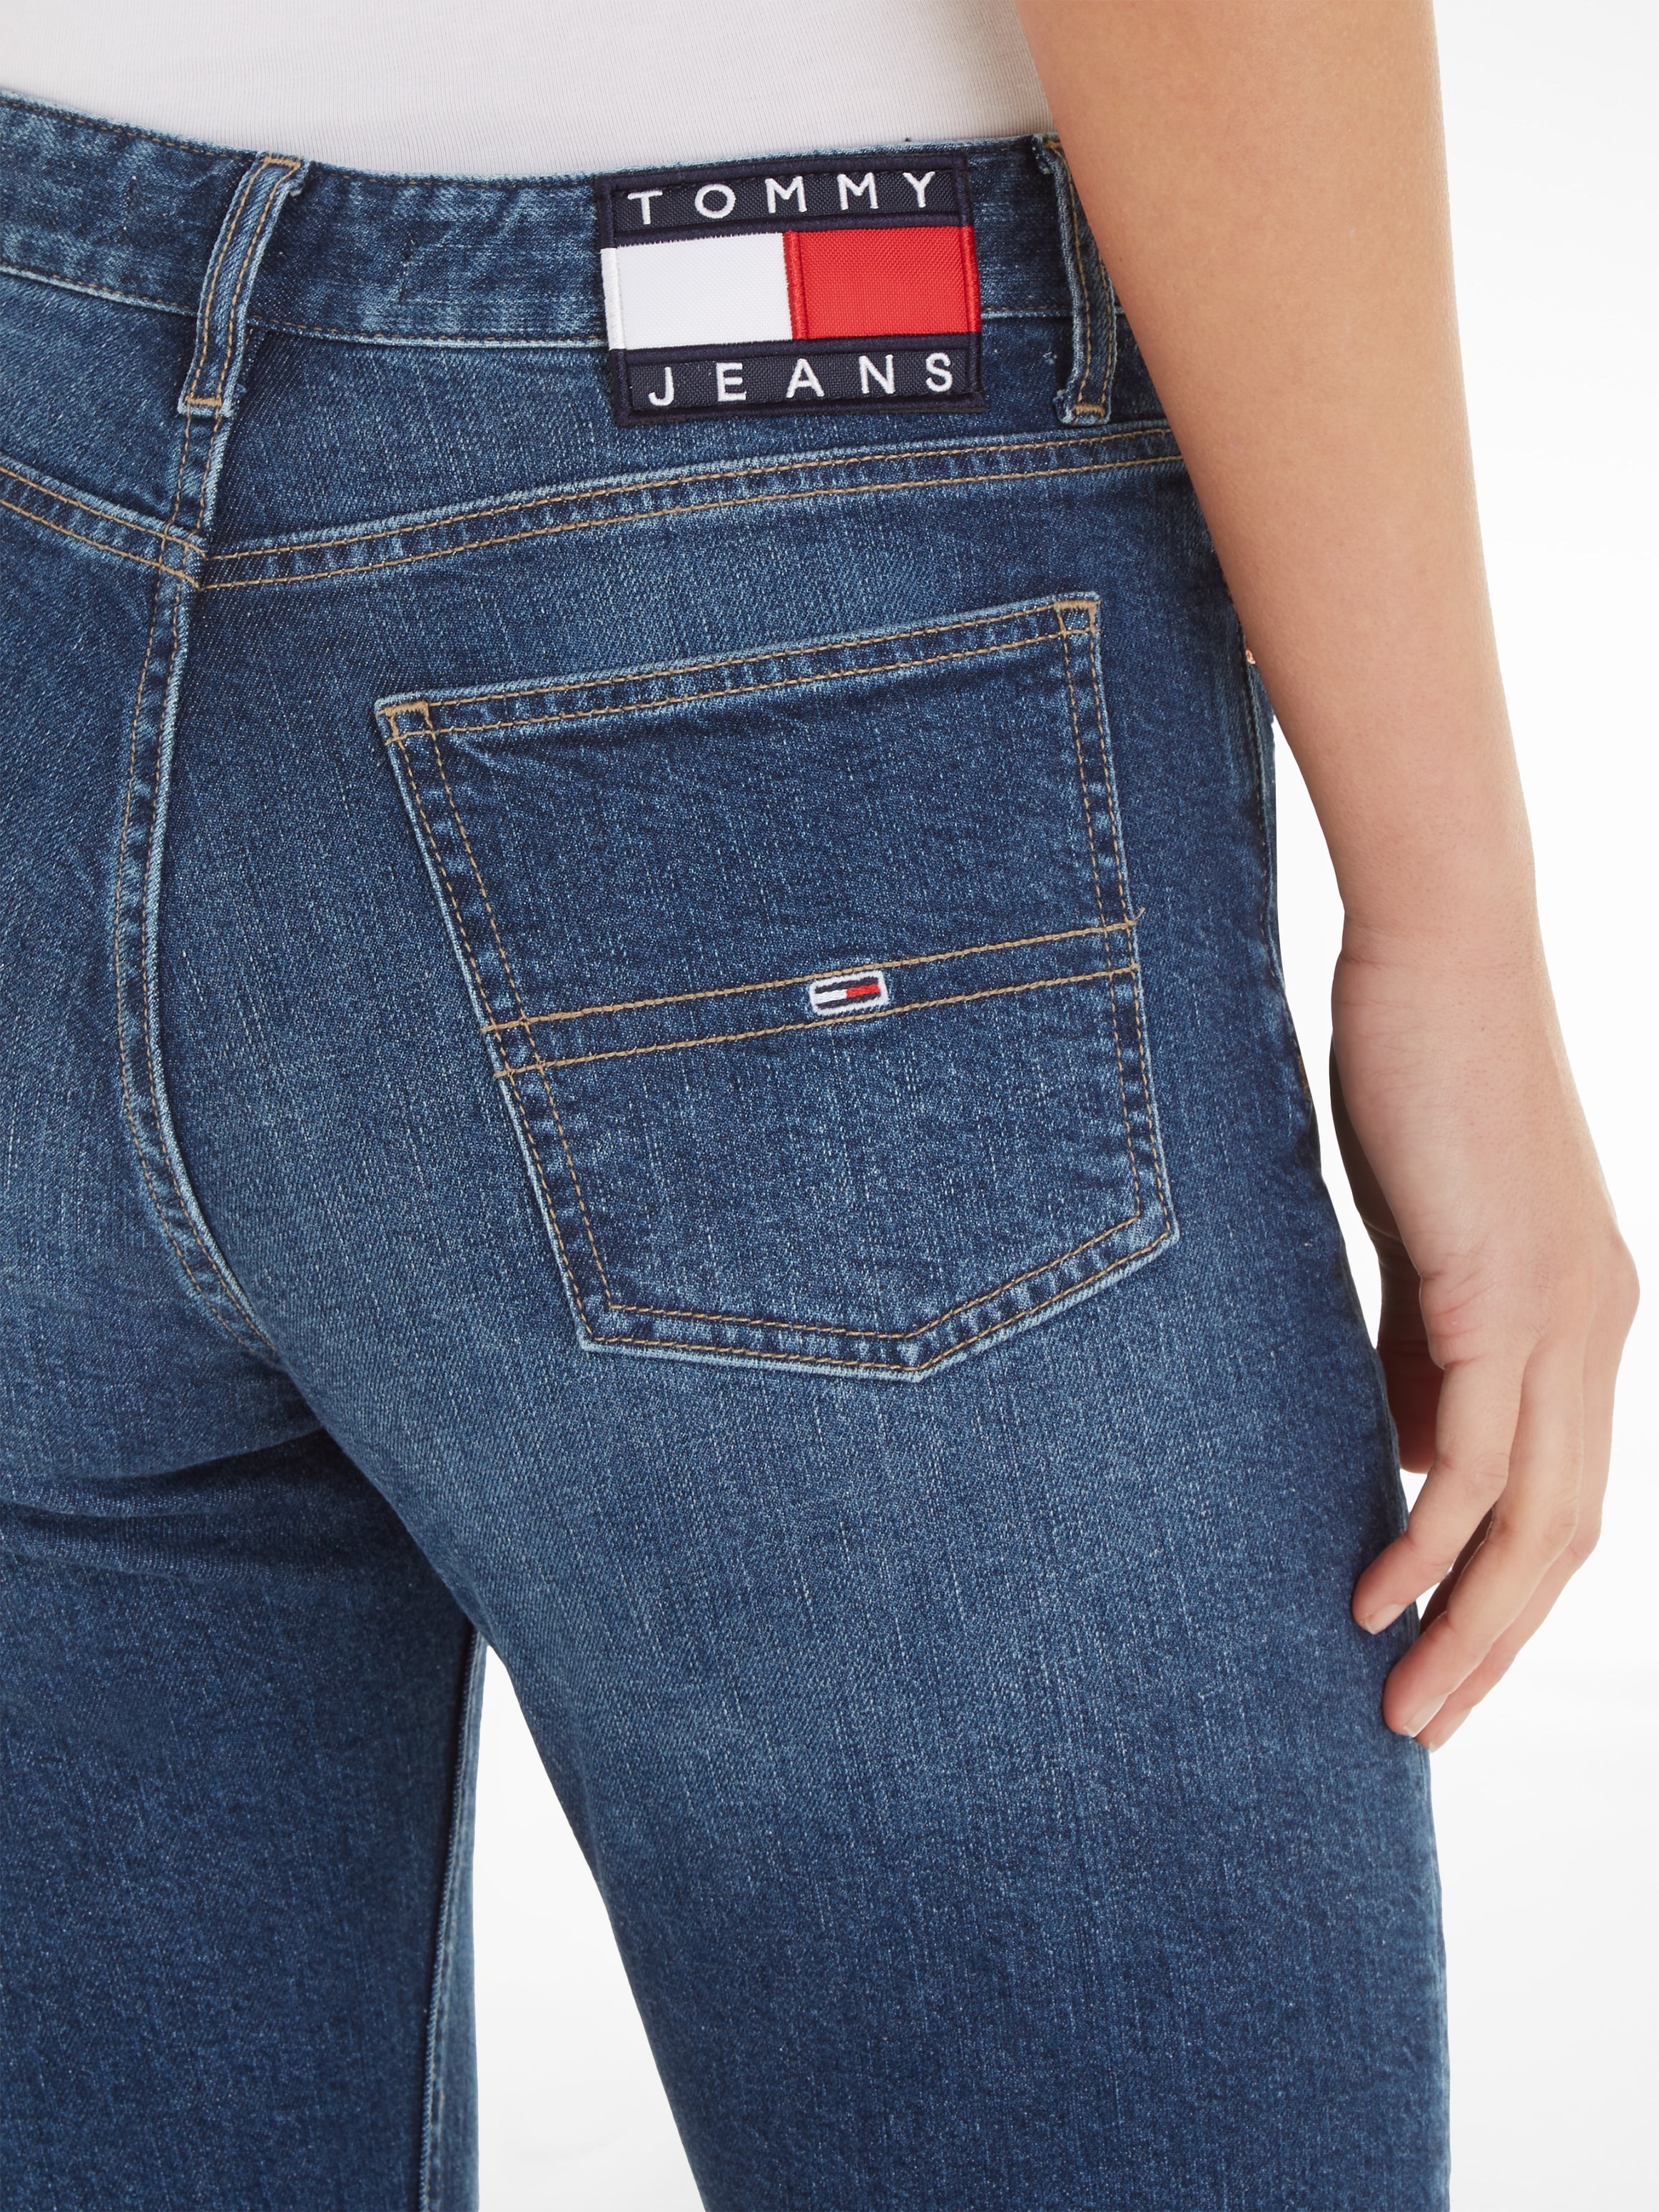 Logo-Badge Jeans HR mit CG4139«, bei Slim-fit-Jeans ANK Tommy OTTOversand »IZZIE SL Tommy